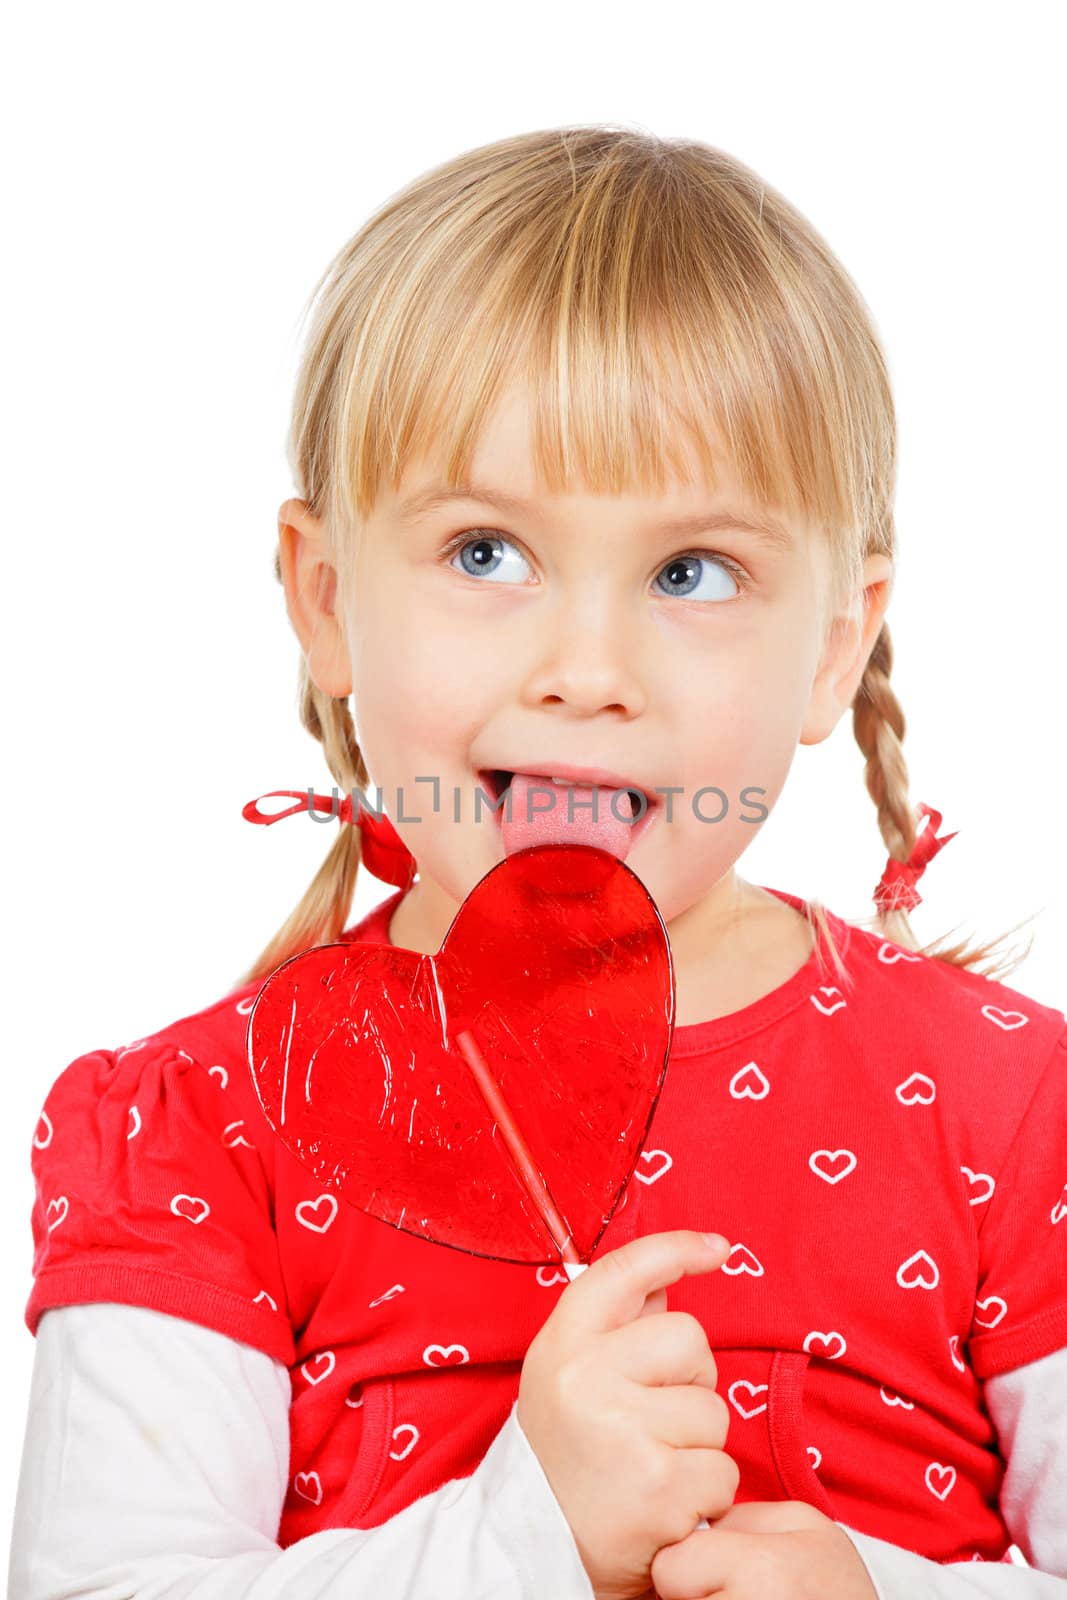 Child with lollypop by naumoid